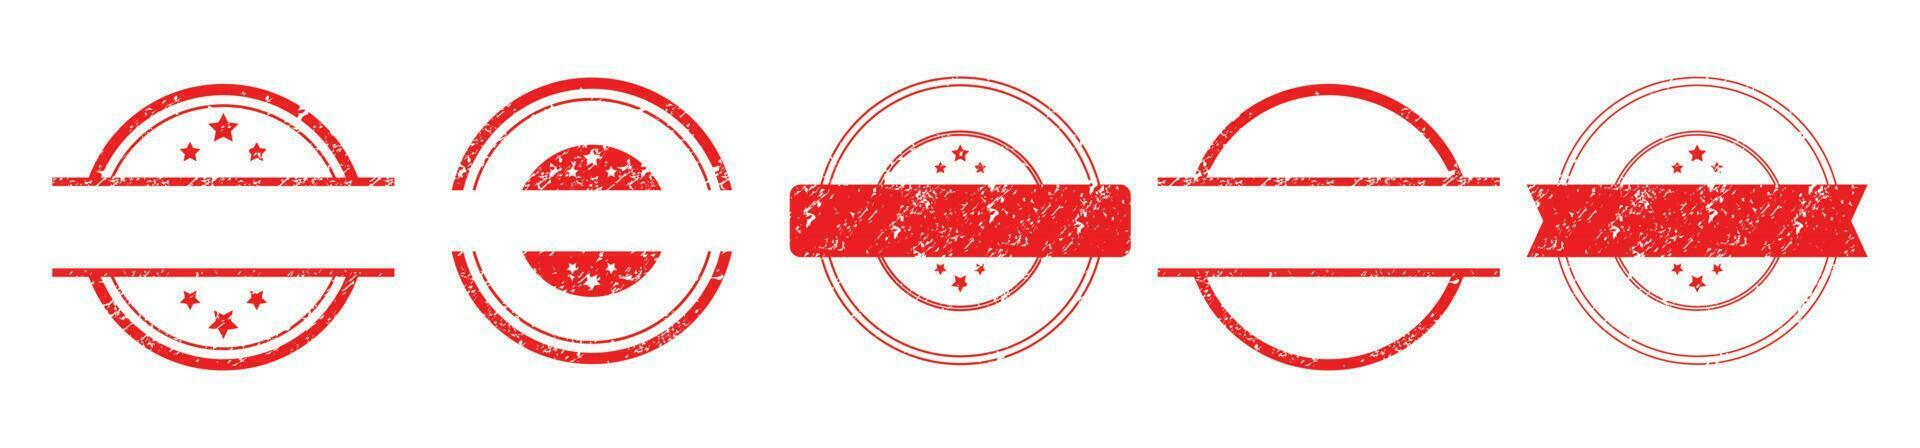 red stamp template with grungy old messy texture vector